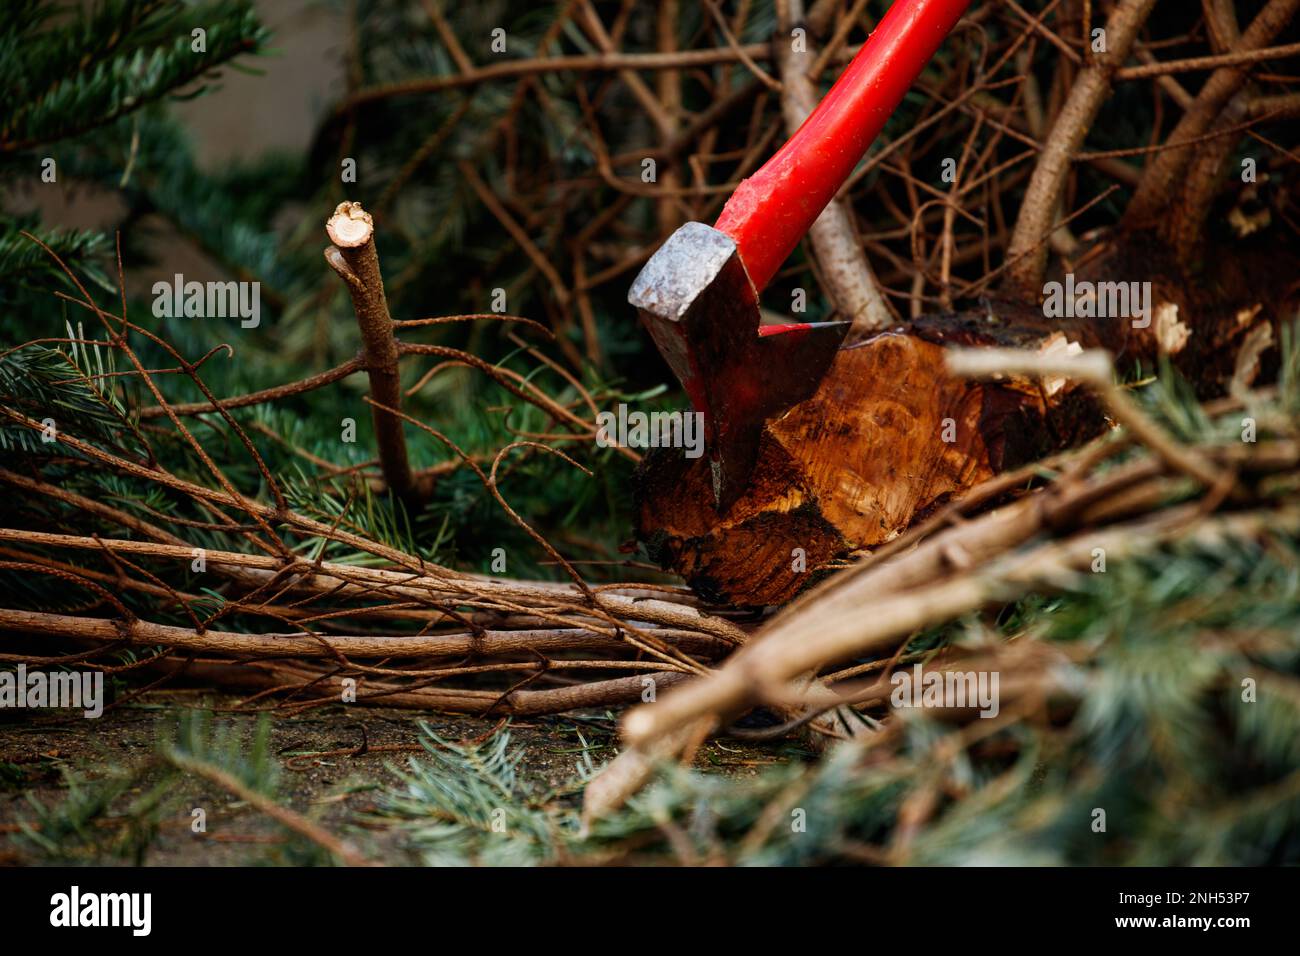 Close-up image of an axe in the Christmas fir tree trunk Stock Photo